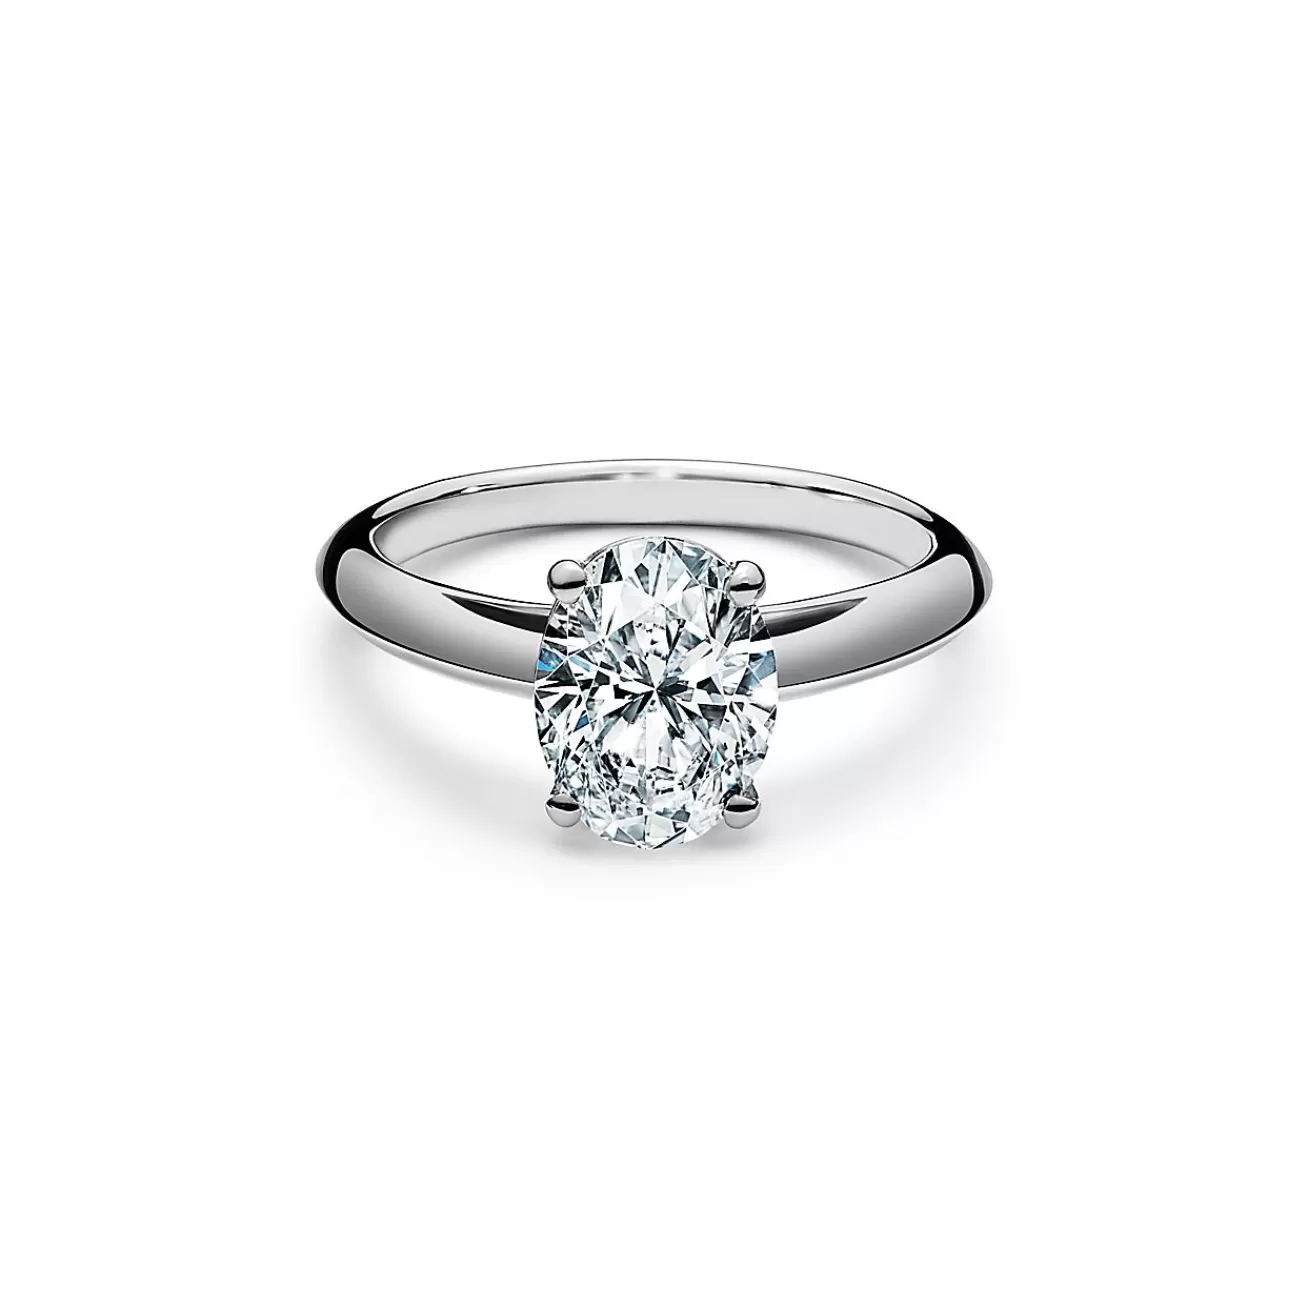 Tiffany & Co. Oval-cut diamond engagement ring in platinum. | ^ Engagement Rings